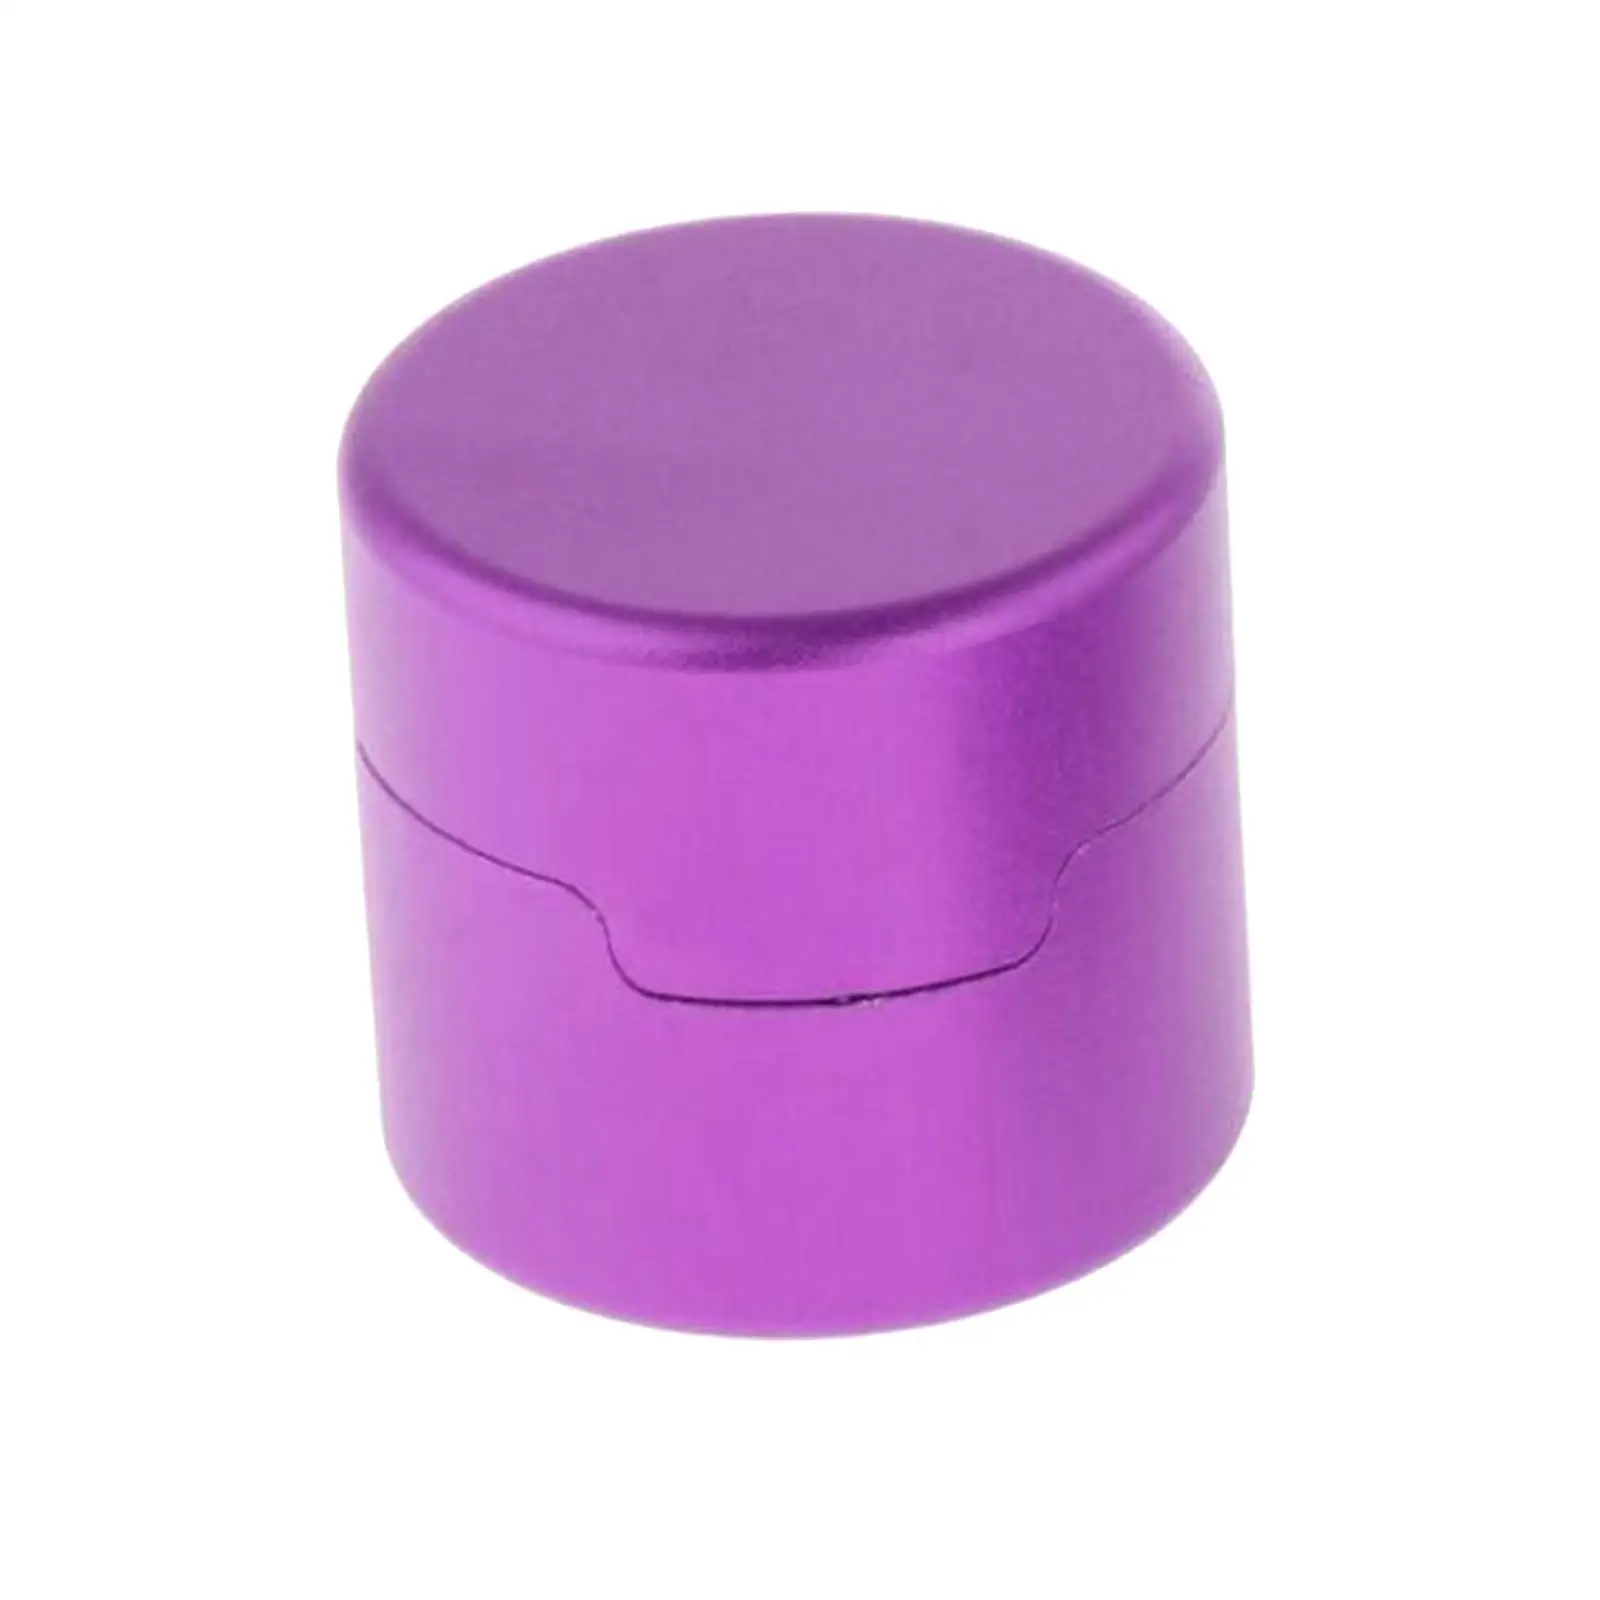 Pool Cue Chalk Holder Round Shaped Cup Box Carrier Case Easy to Use Mini Container Organizer Aluminum Alloy Snooker Accessories